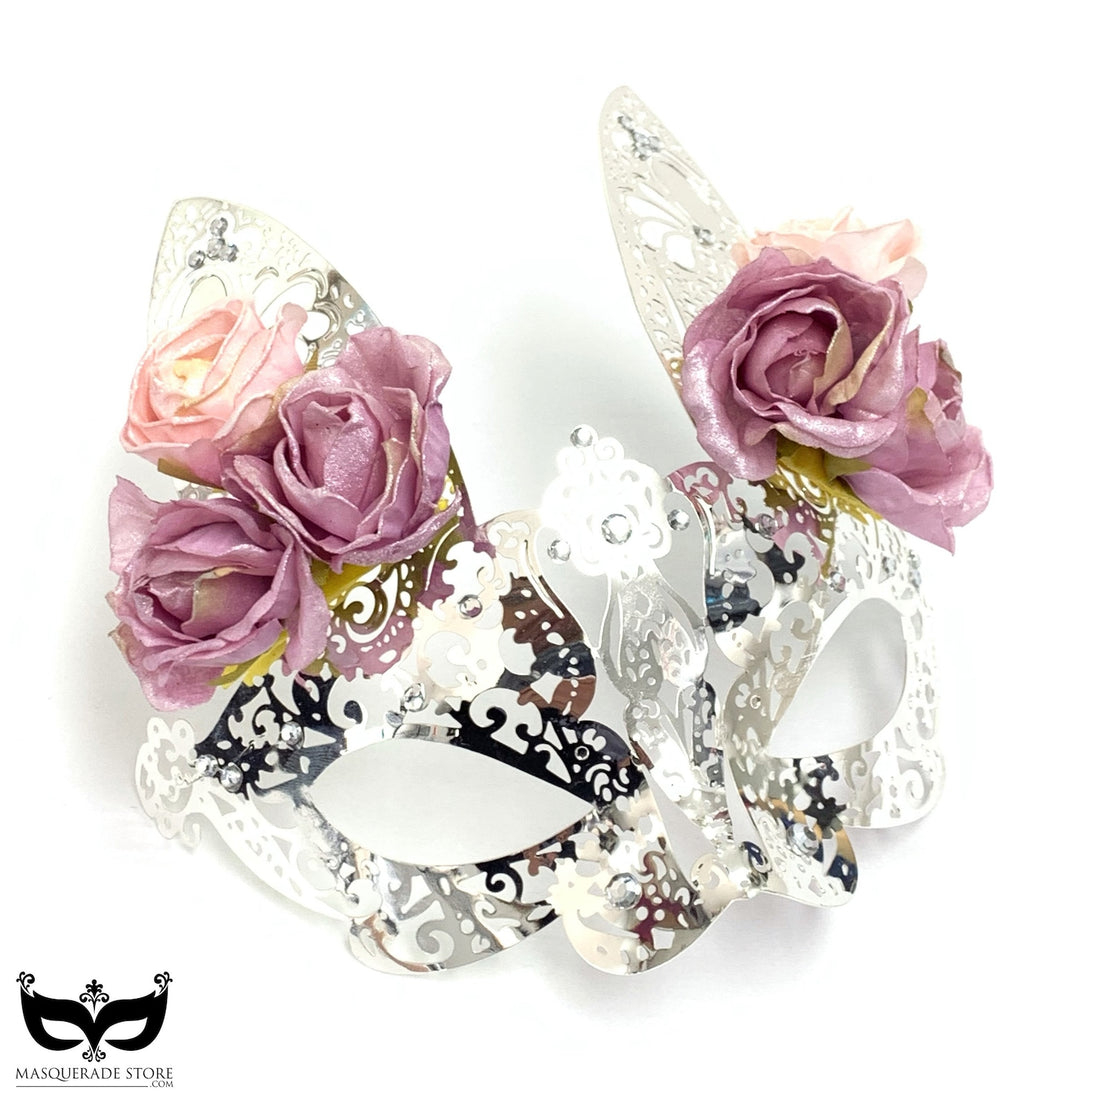 Silver metal bunny masquerade mask for kids with roses and rhinestones.